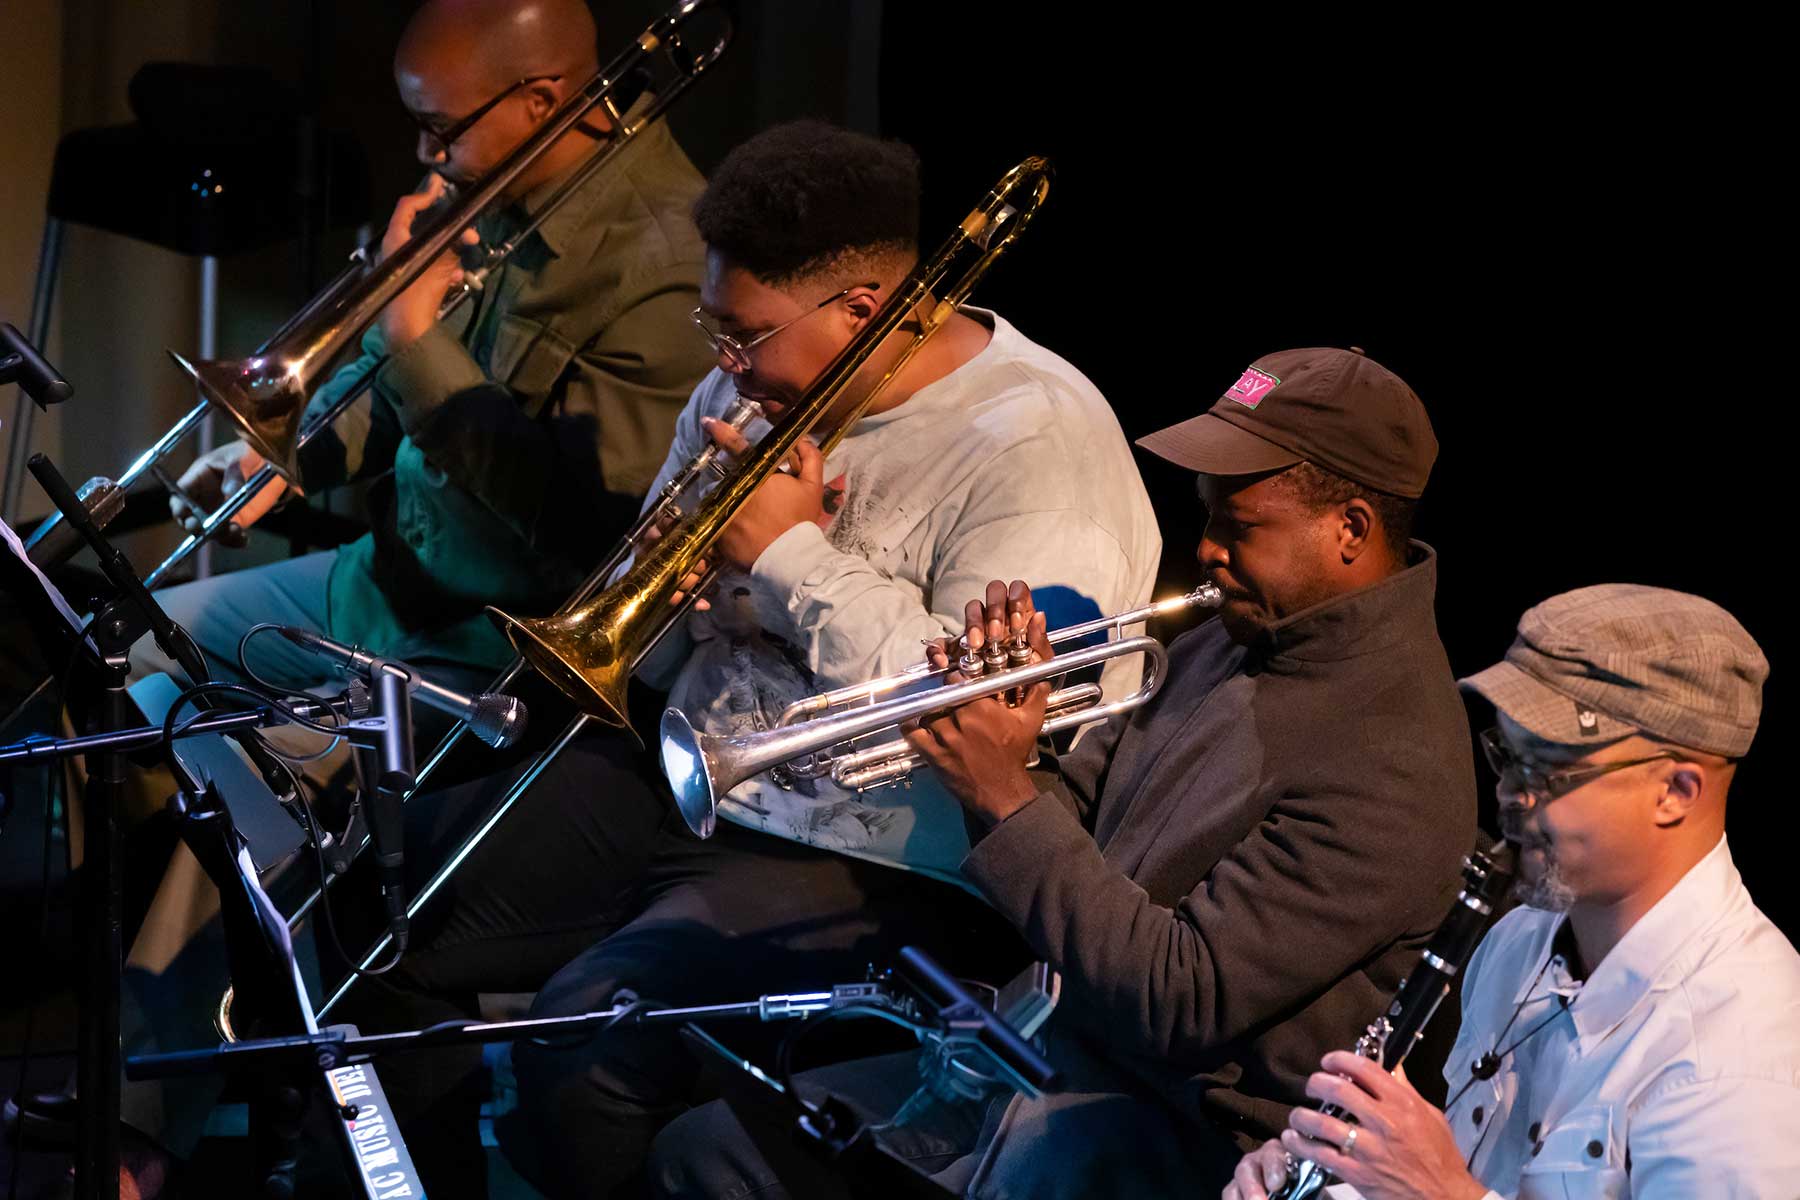 Four men sitting in a line on stage playing wind instruments.